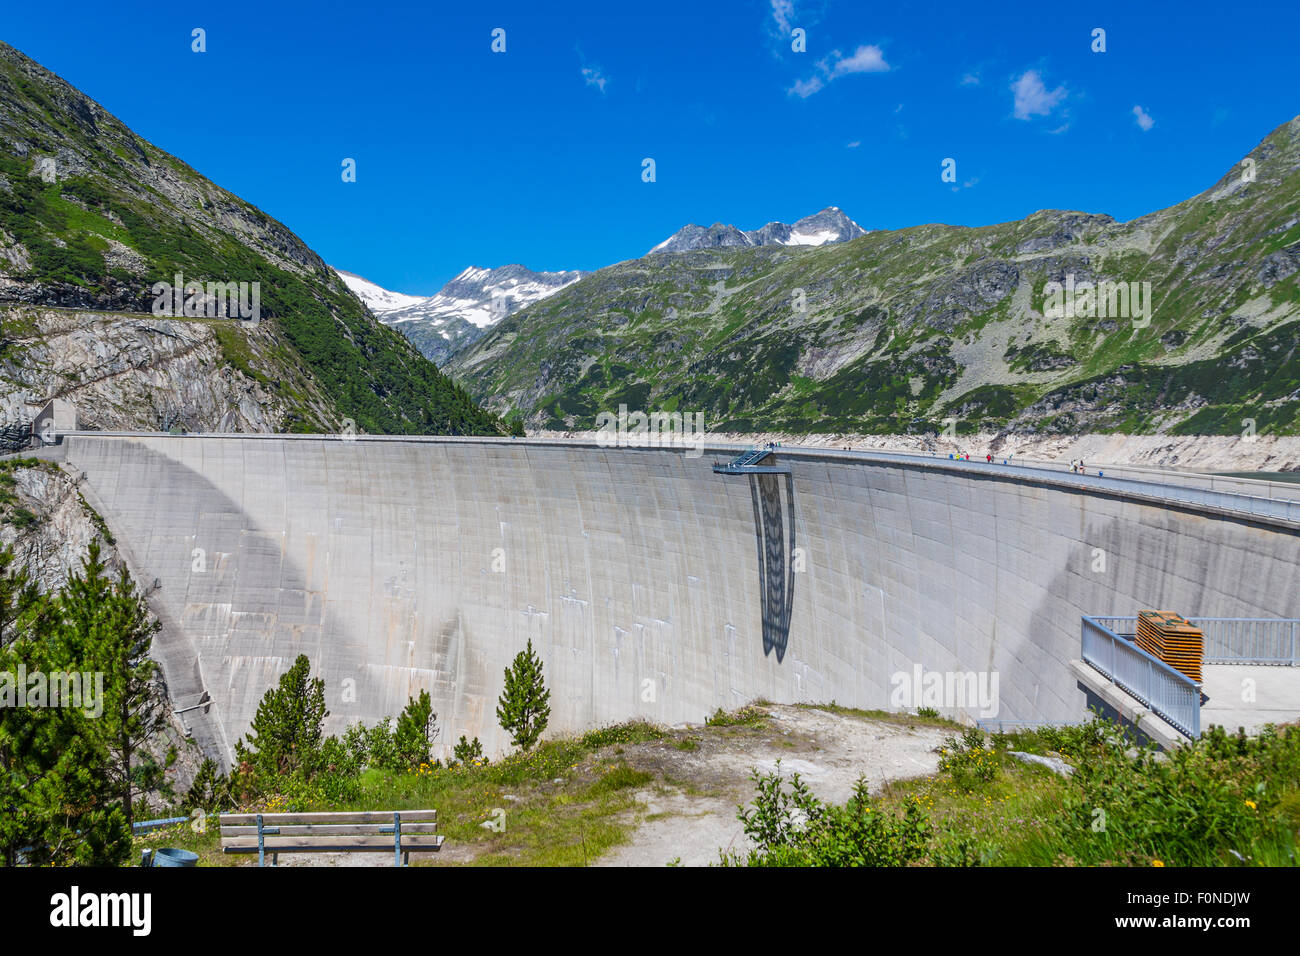 Big dam in the mountains Stock Photo